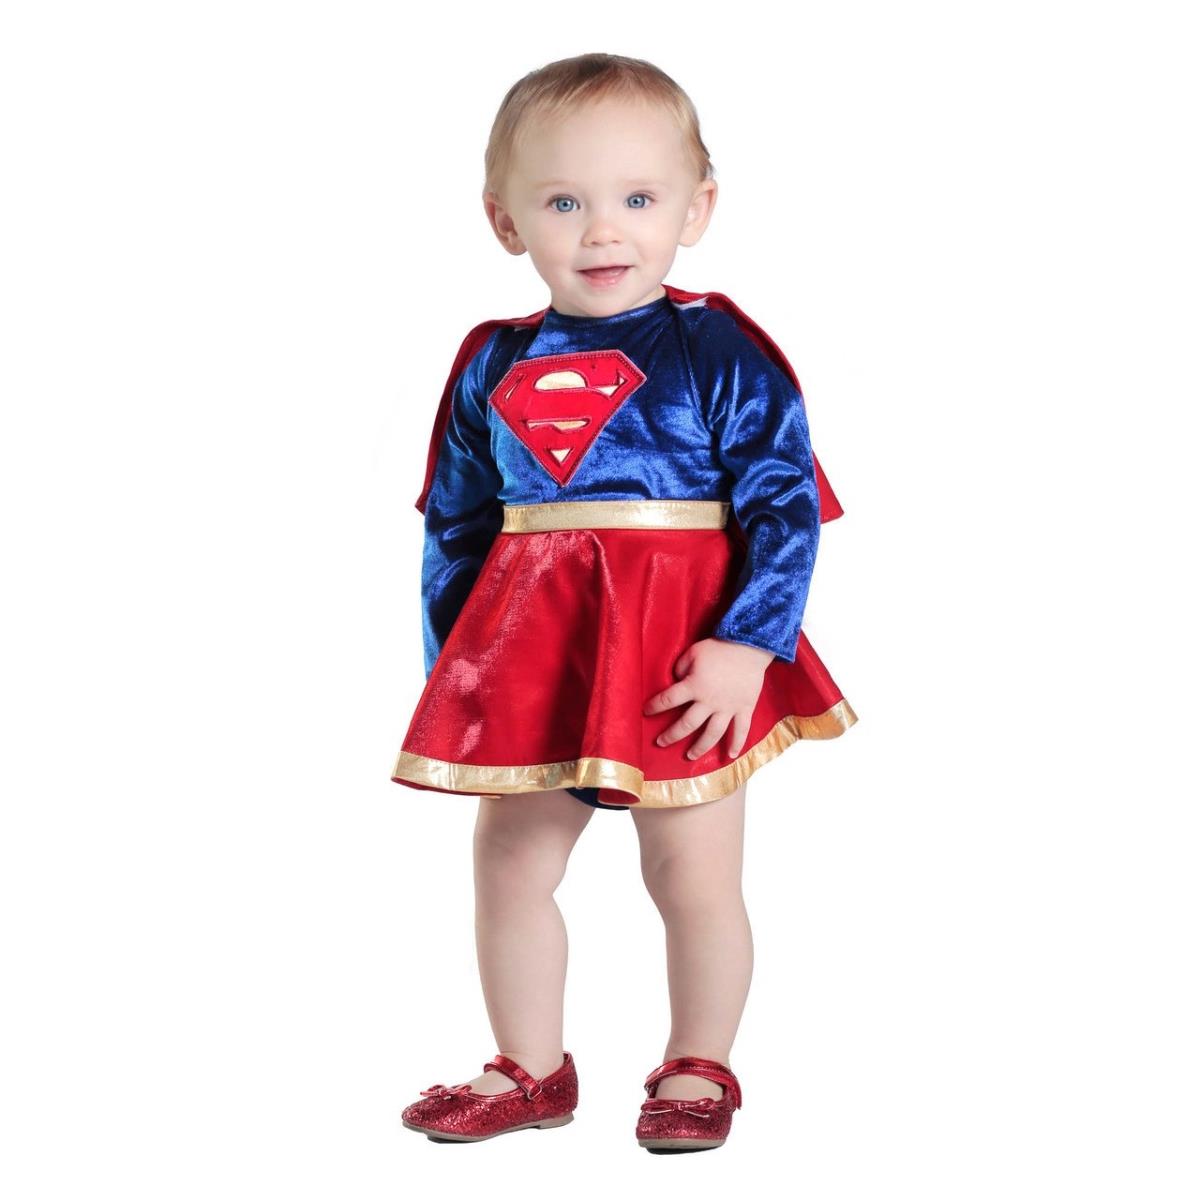 280684 Baby Supergirl Dress & Diaper Cover Set Costume, 18 Months-2t